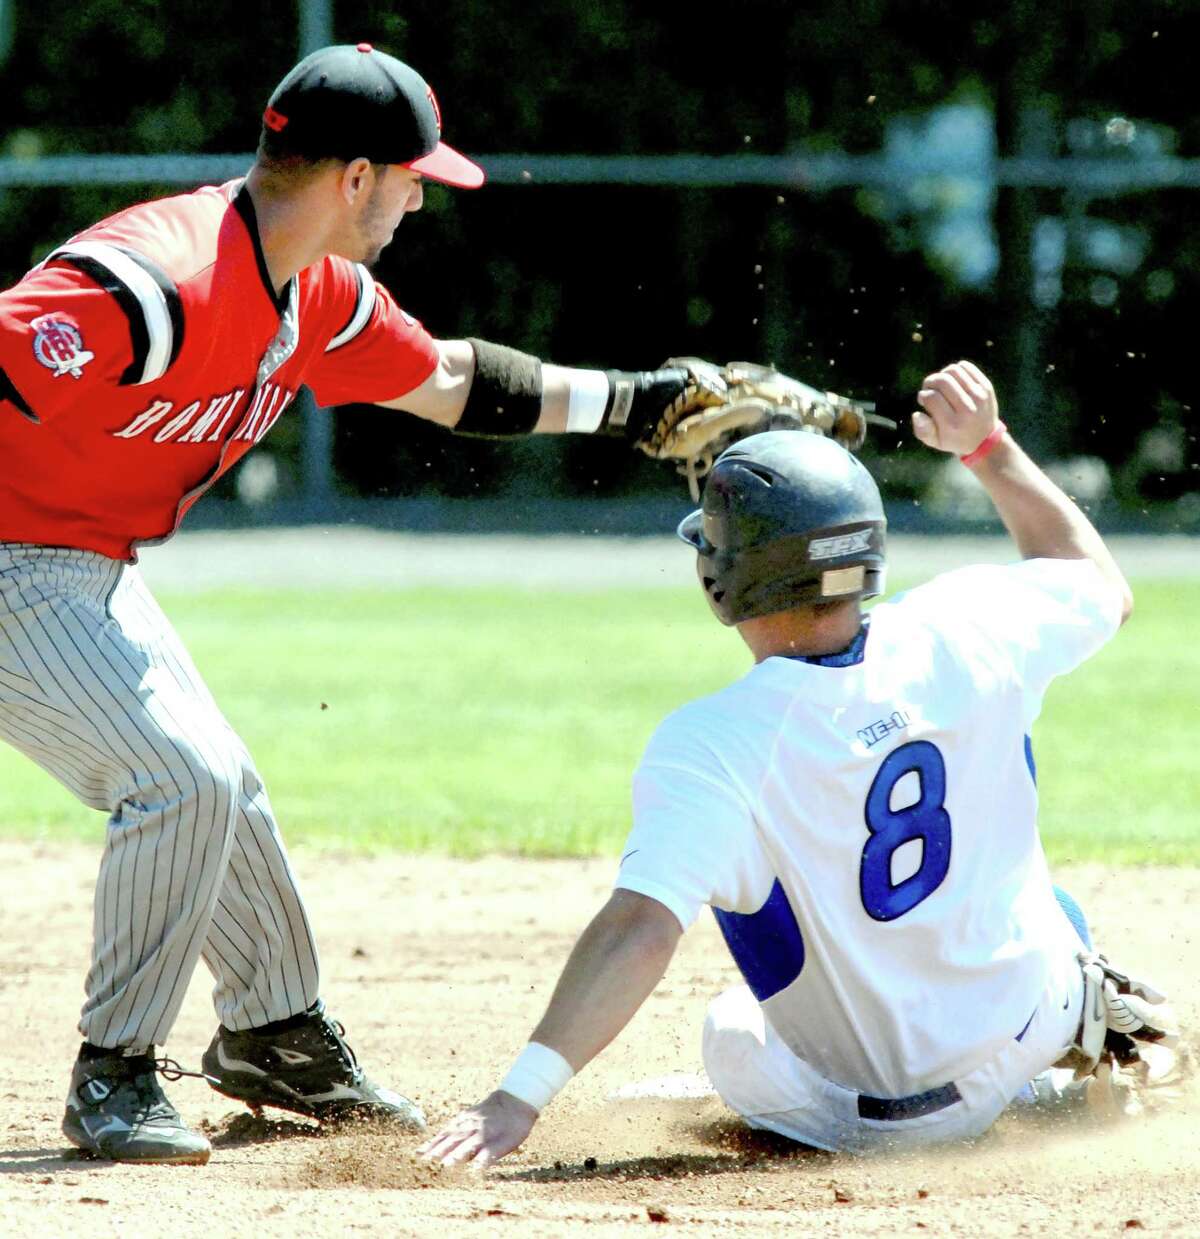 SCSU's Nick DeProspo is tagged out while attempting to steal second base on Thursday.